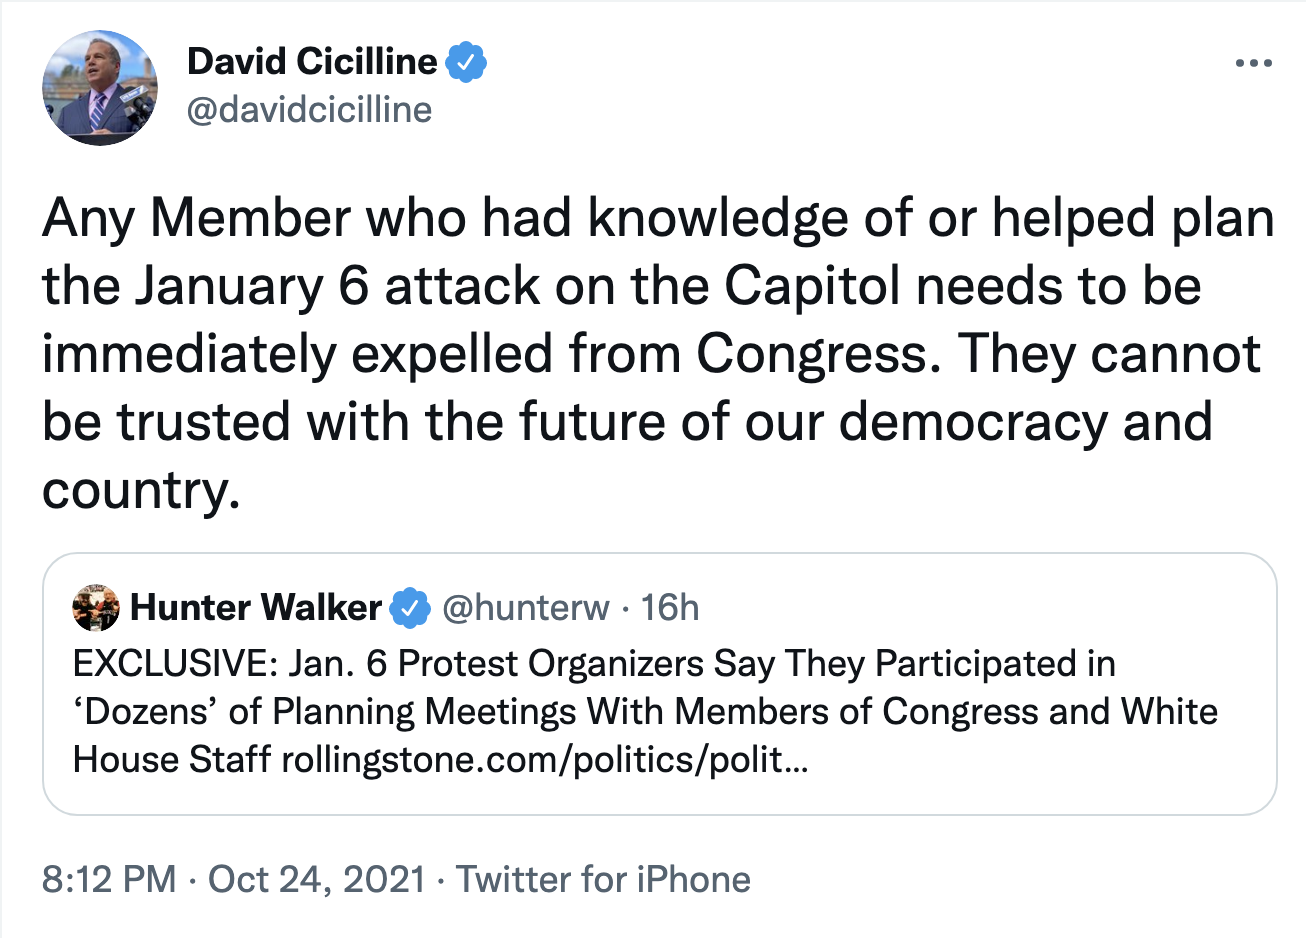 Screen-Shot-2021-10-25-at-11.41.48-AM Expulsion Of Congress Members Who Aided Insurrection Proposed Donald Trump Featured Politics Terrorism Top Stories 